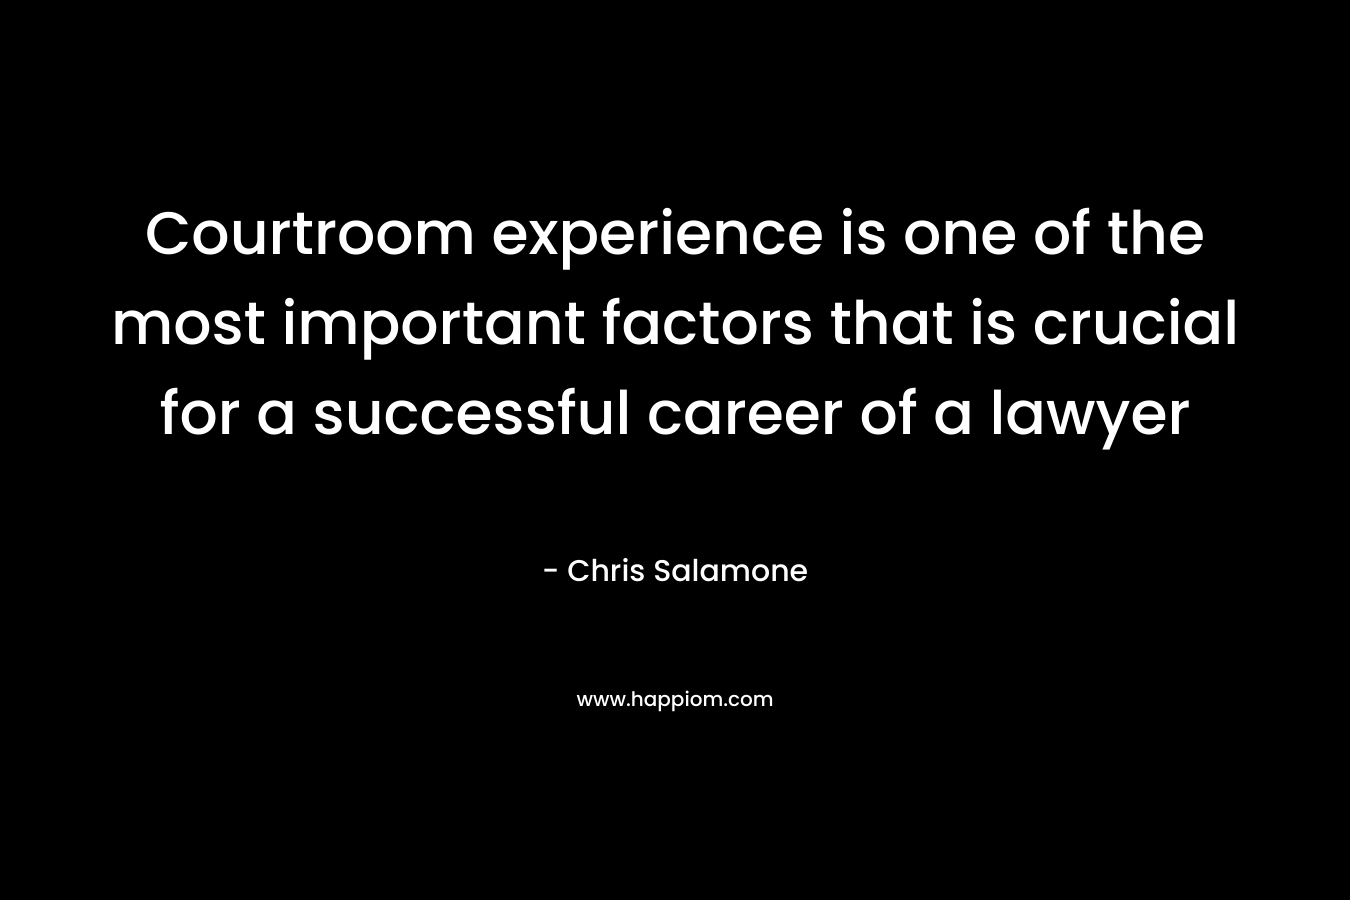 Courtroom experience is one of the most important factors that is crucial for a successful career of a lawyer – Chris Salamone